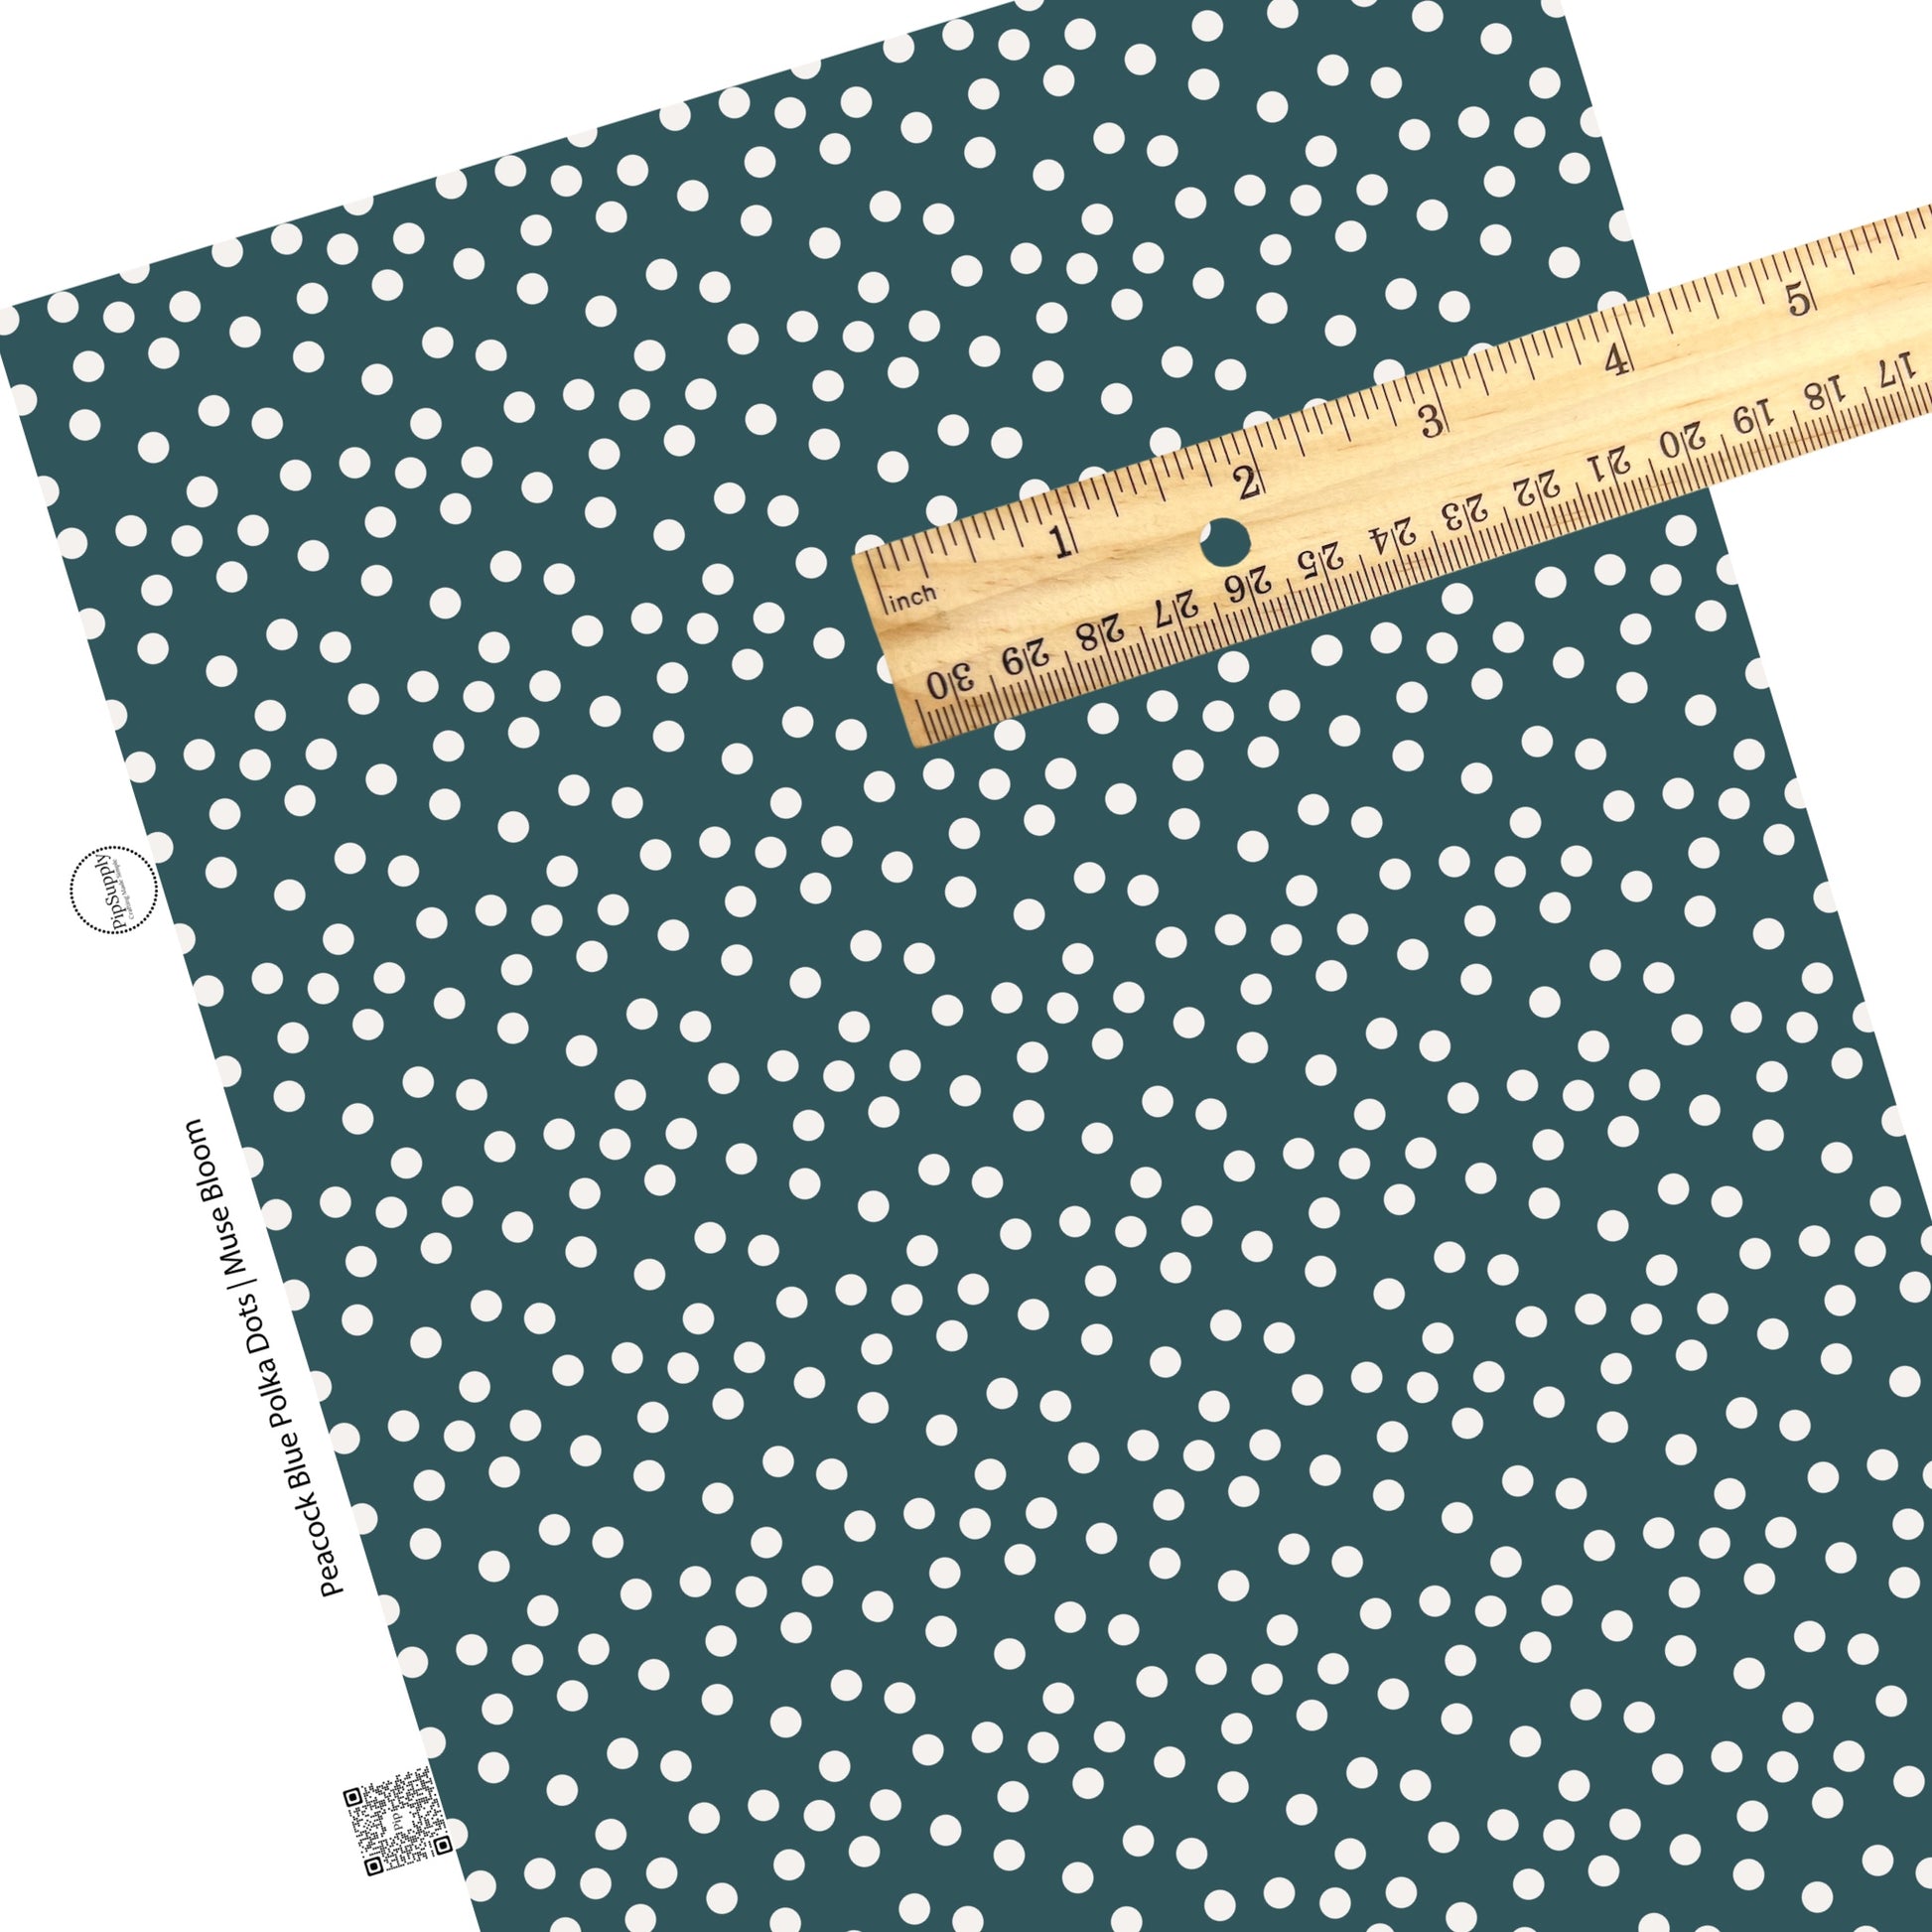 White polka dots on peacock blue faux leather sheets